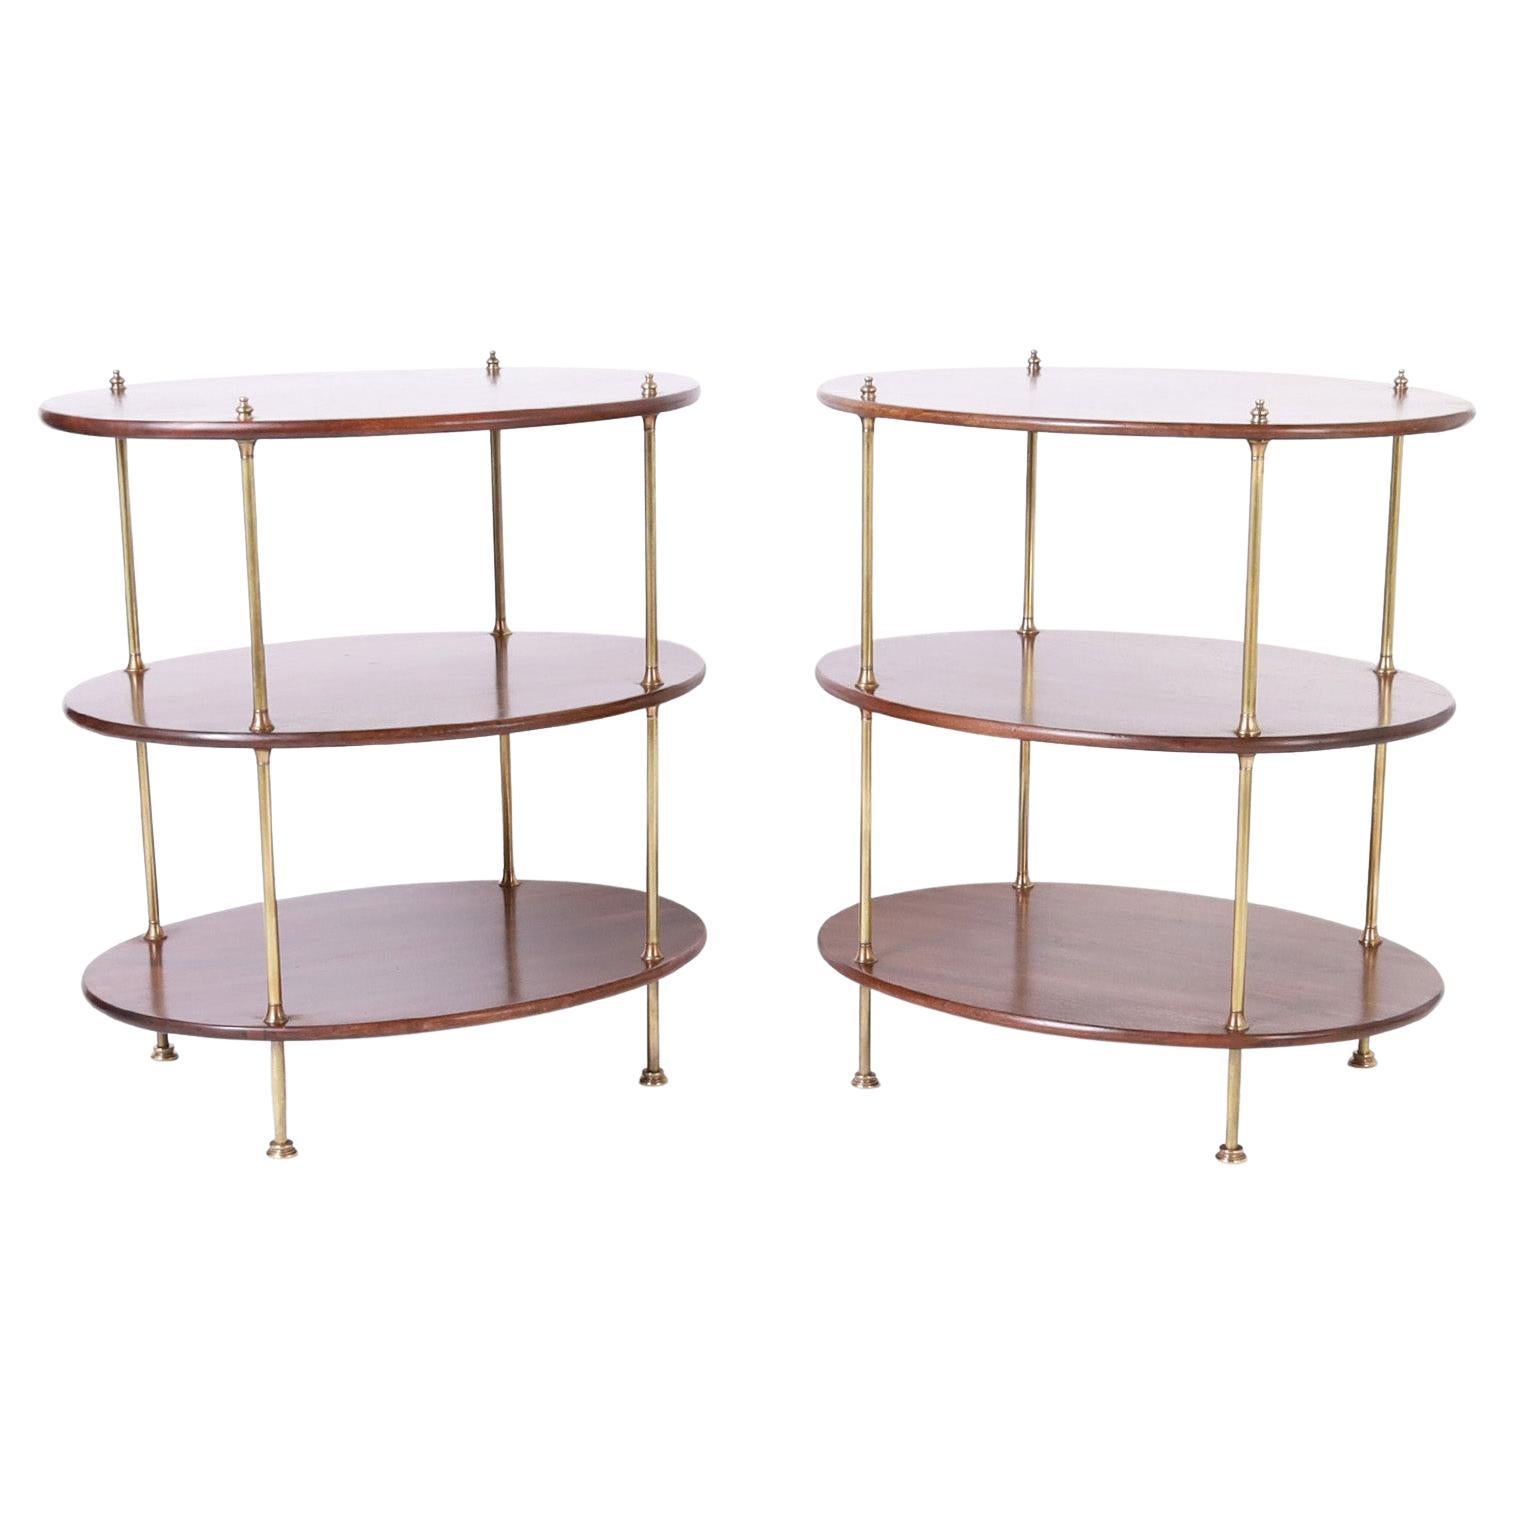 Pair of British Colonial Style Three Tiered Oval Stands